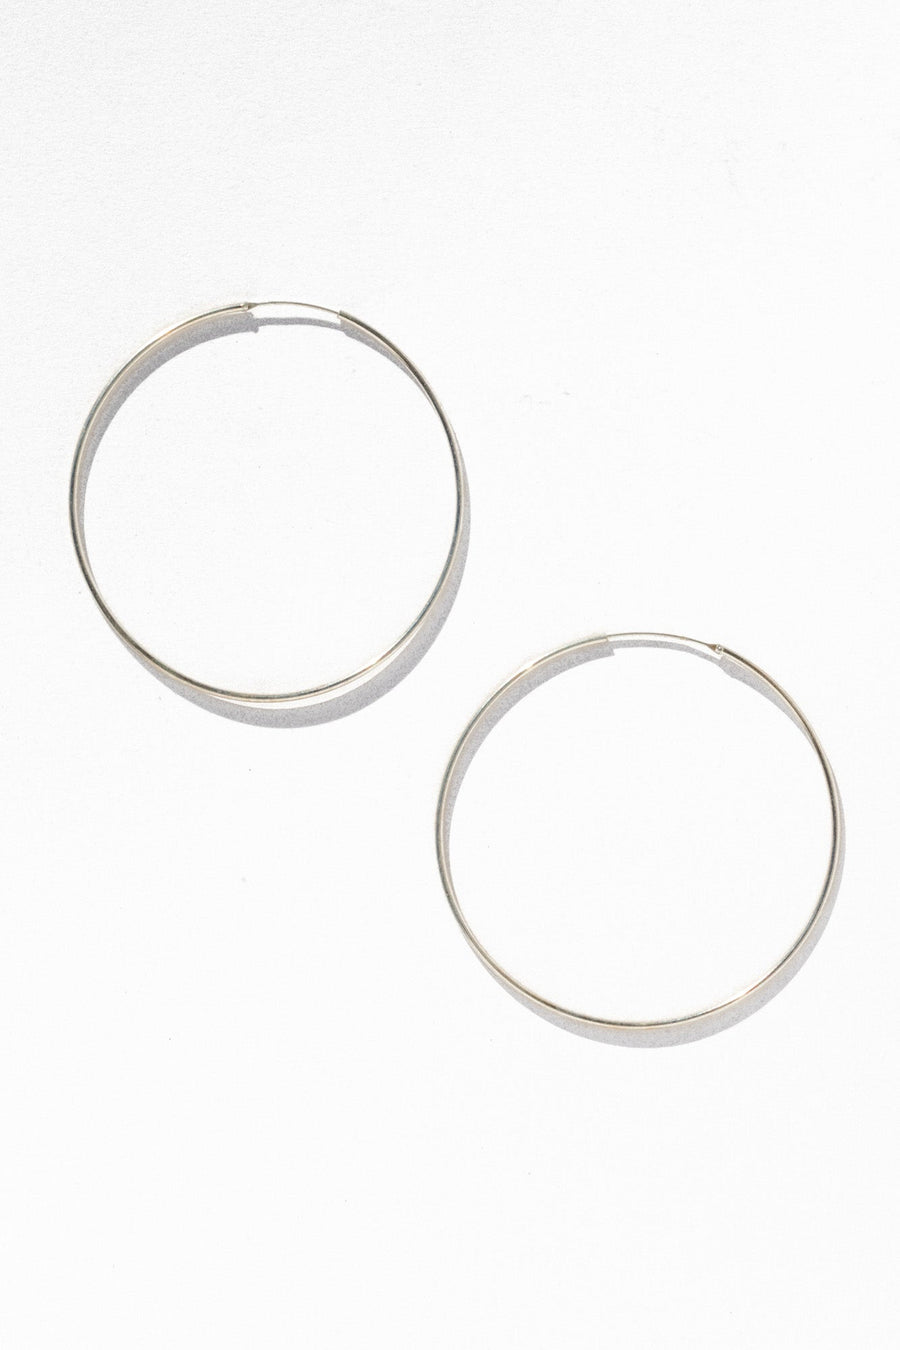 The Wellman Group Jewelry Silver Full Moon Statement Hoops